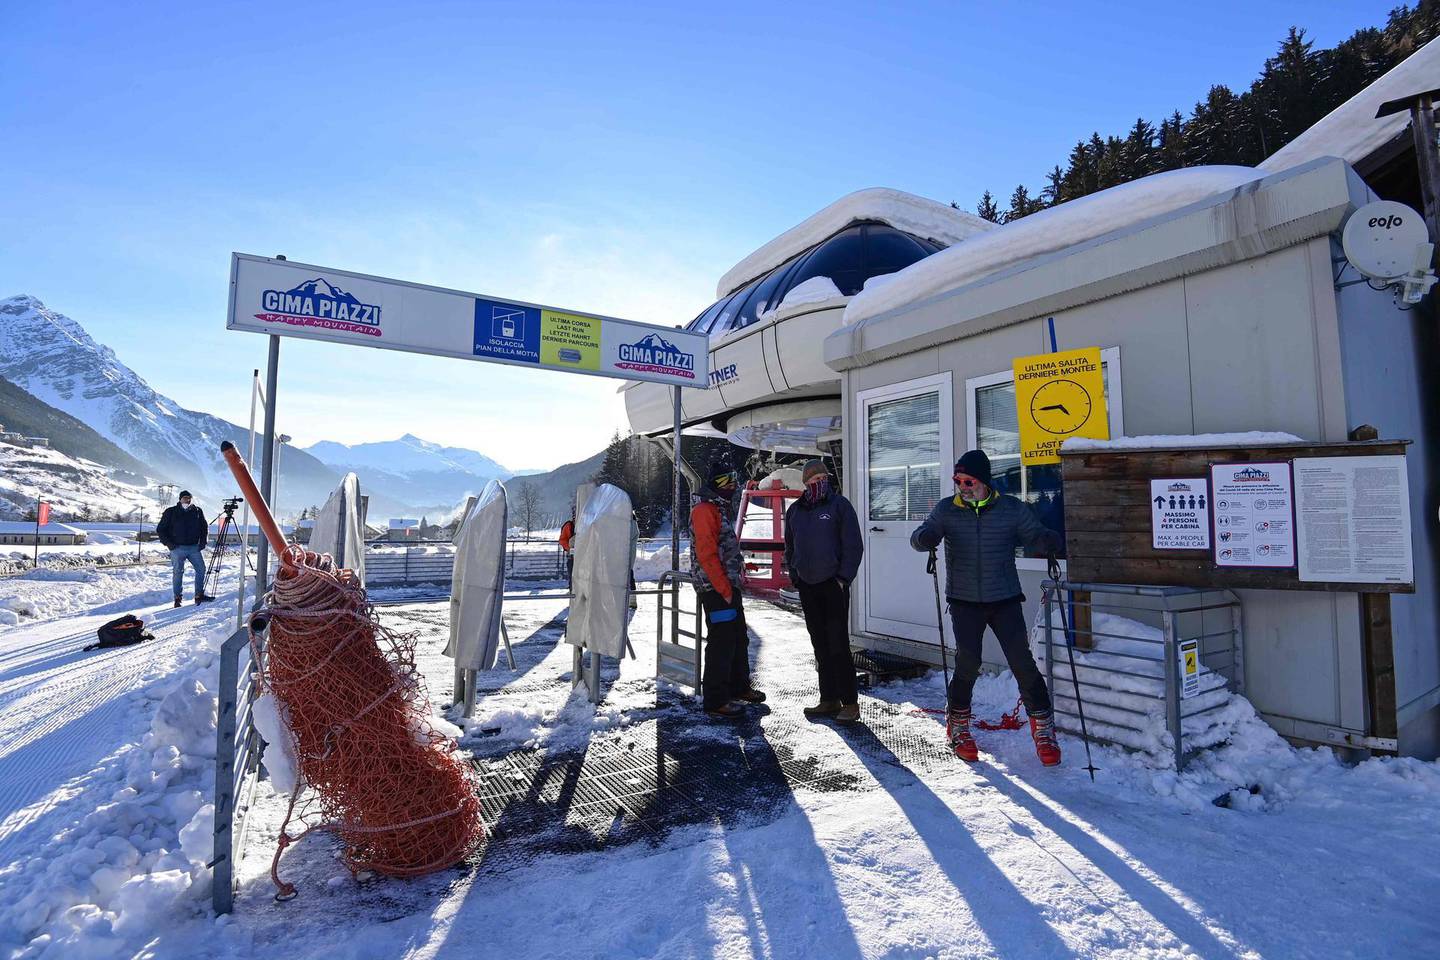 A skier (R) leaves the ski lifts of the Cima Piazzi ski resort in Isolaccia near Bormio, Italian Alps, on February 15, 2021. Italy's Health Ministry on February 14 decided to keep closed ski resorts that were due to reopen on February 15, due the progression of the coronavirus variants, until March 5, 2021, the expiry date of the government's latest decree. / AFP / MIGUEL MEDINA
